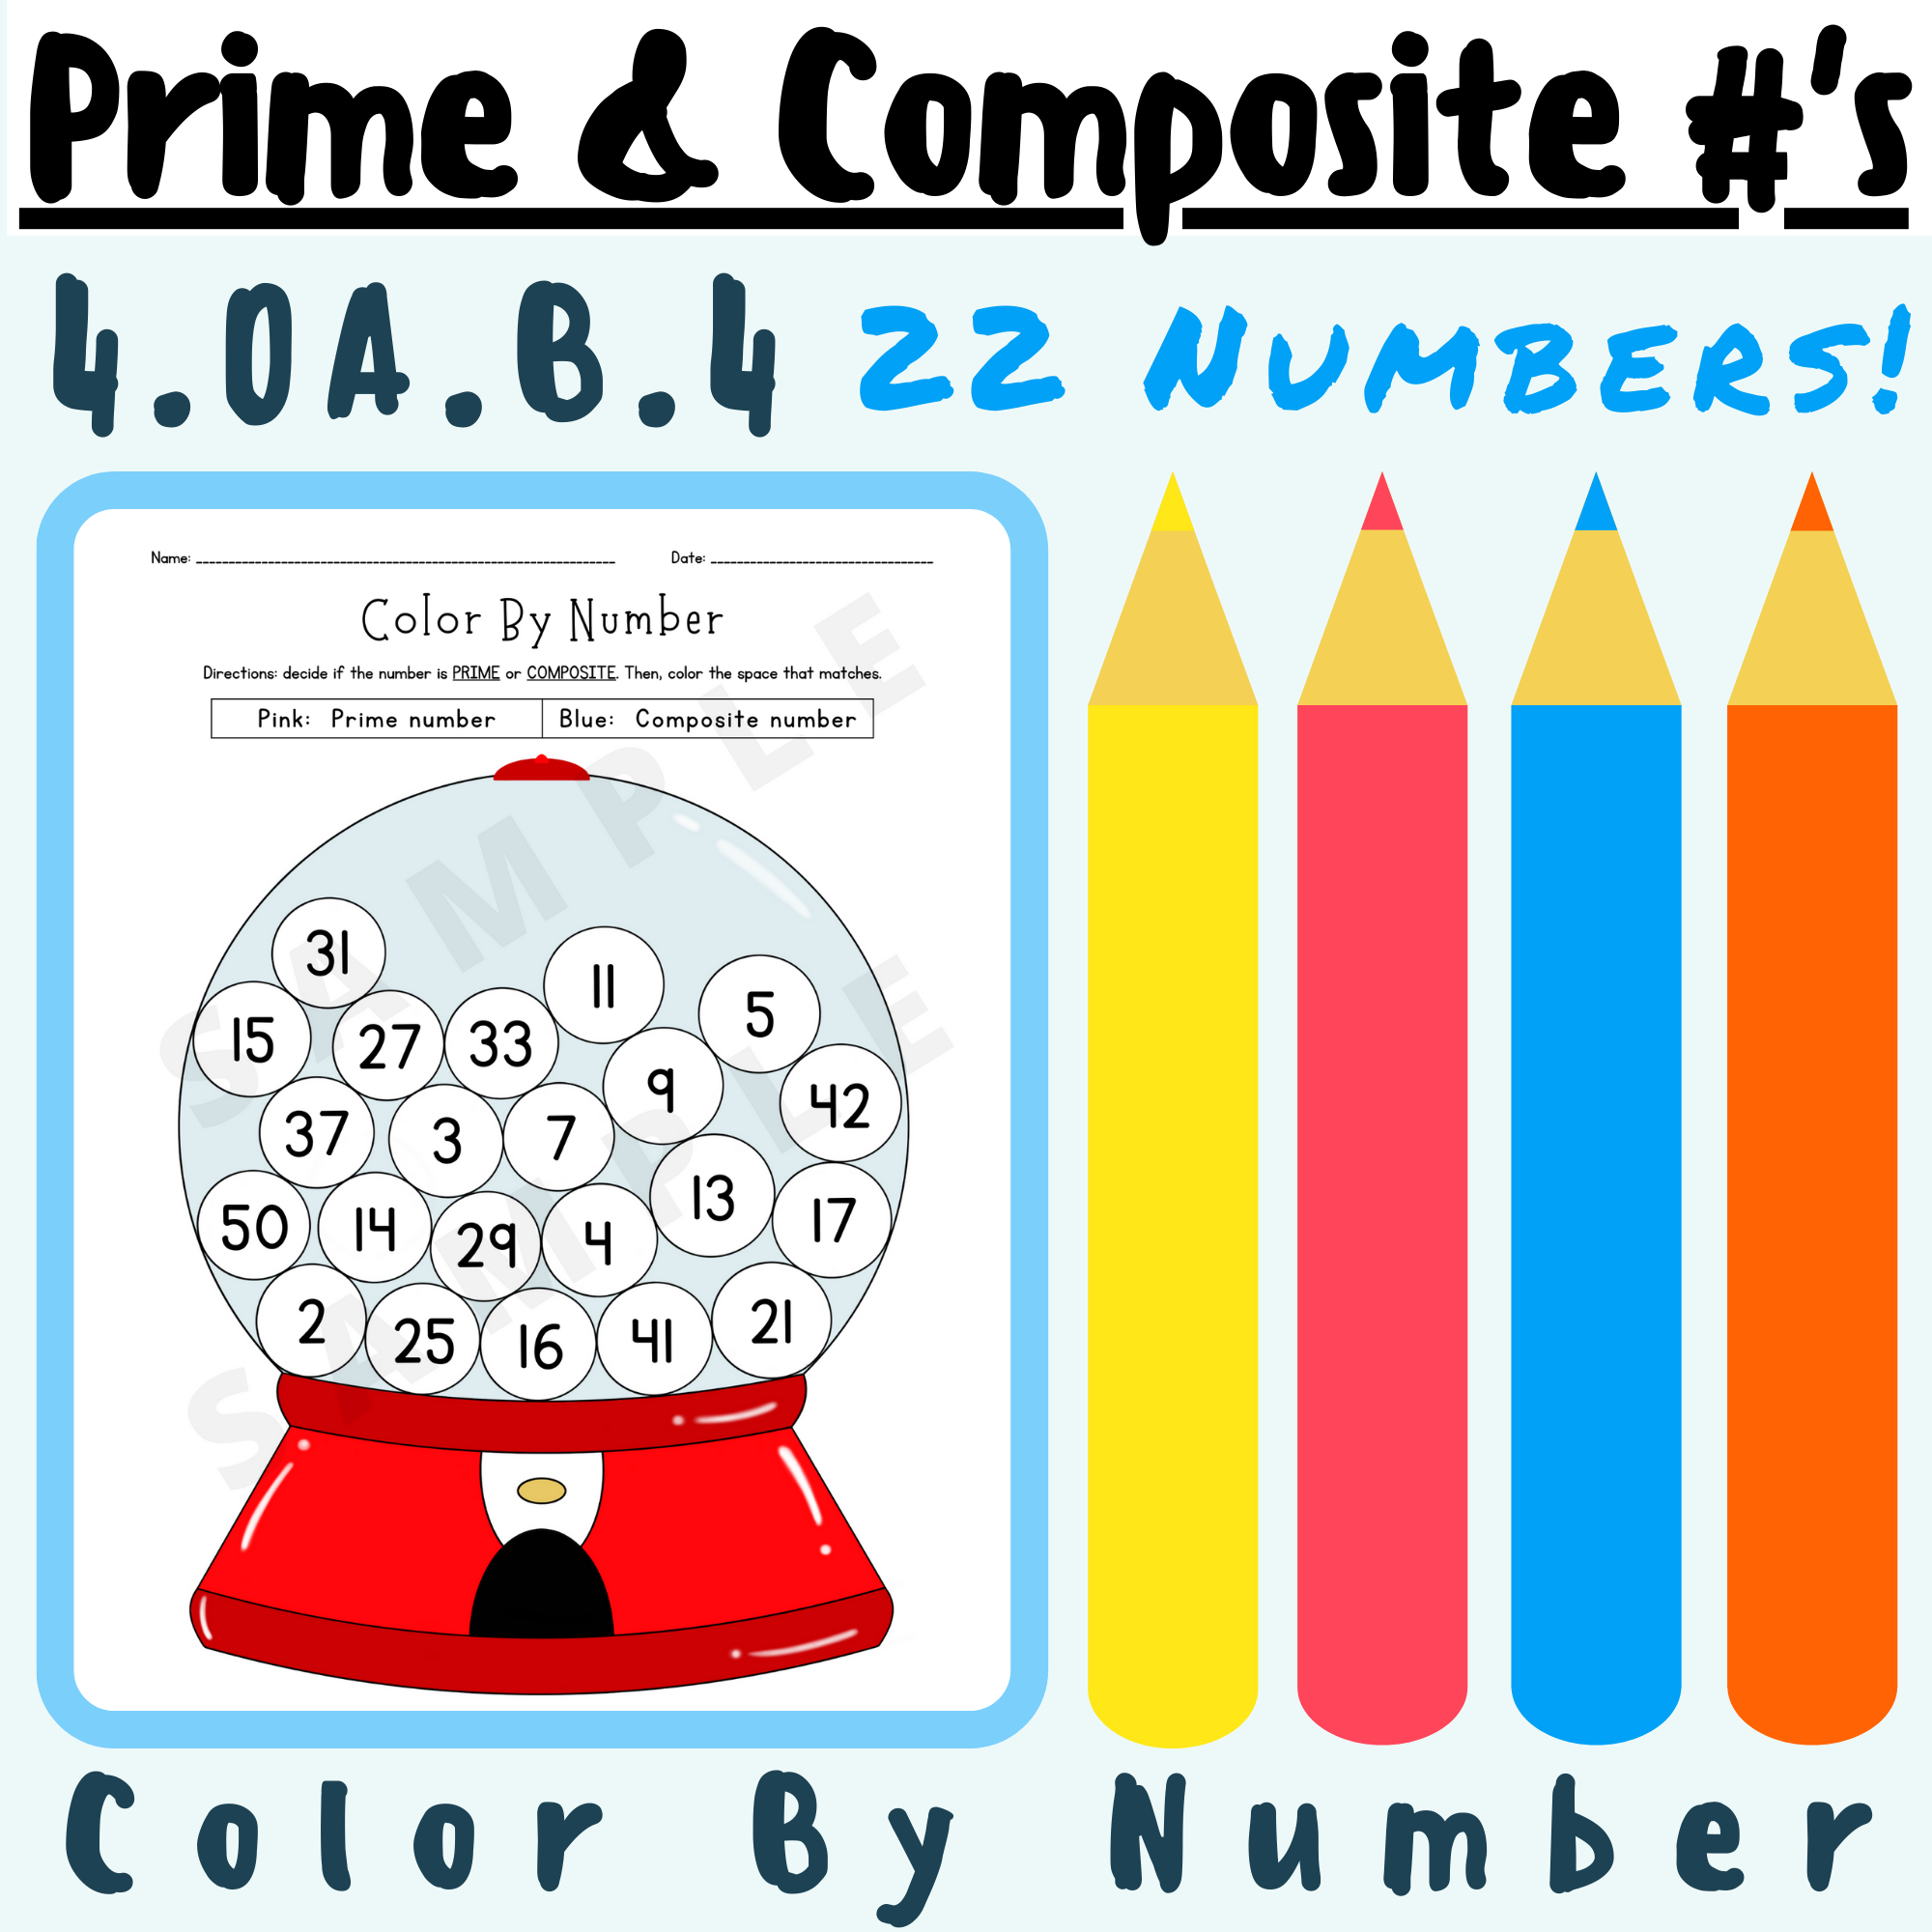 prime-and-composite-numbers-color-by-number-activity-worksheet-4-oa-4-4th-grade-k-5-teachers